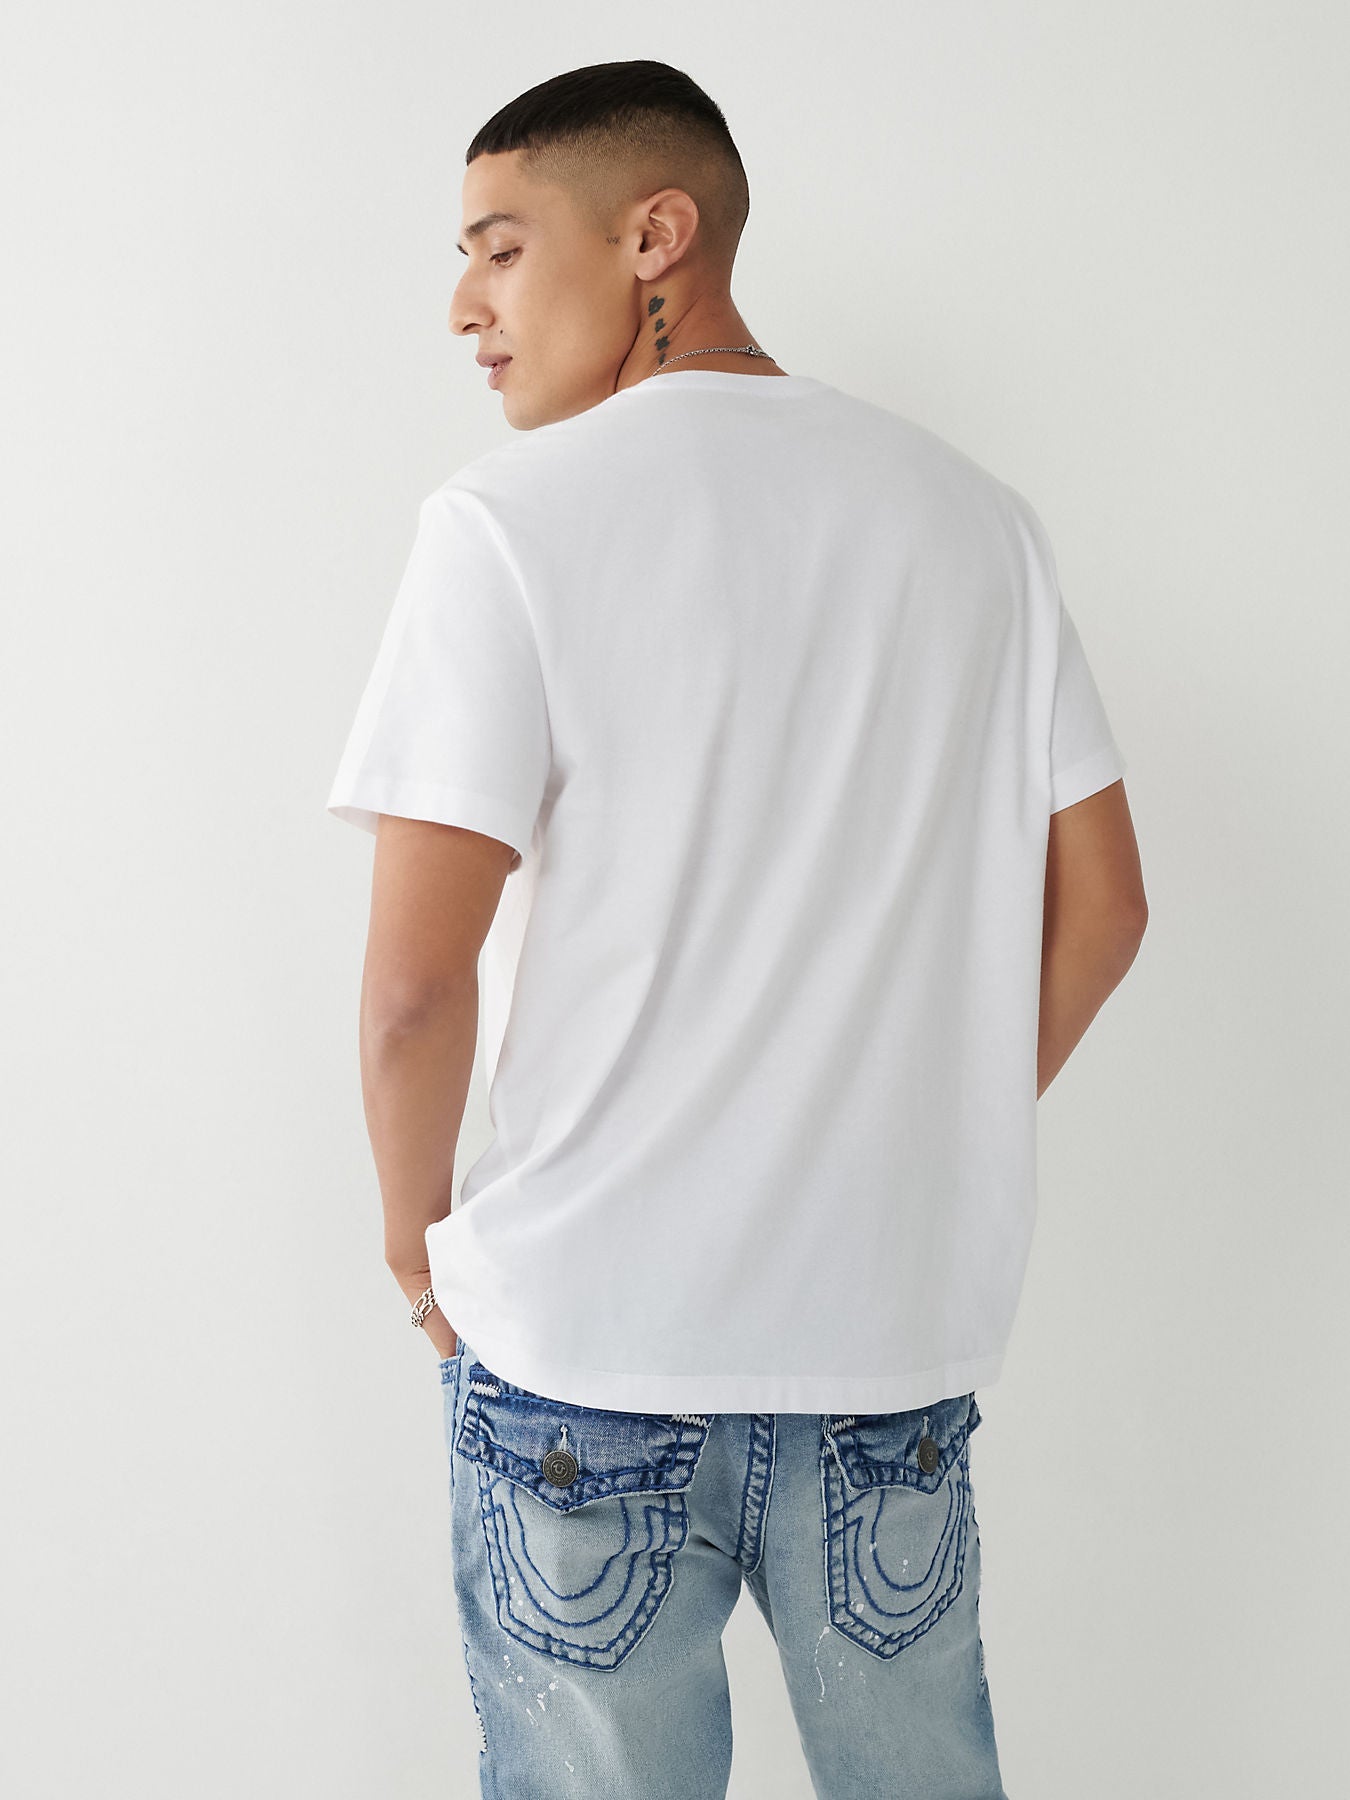 RELAXED TRBJ SHADOW TEE